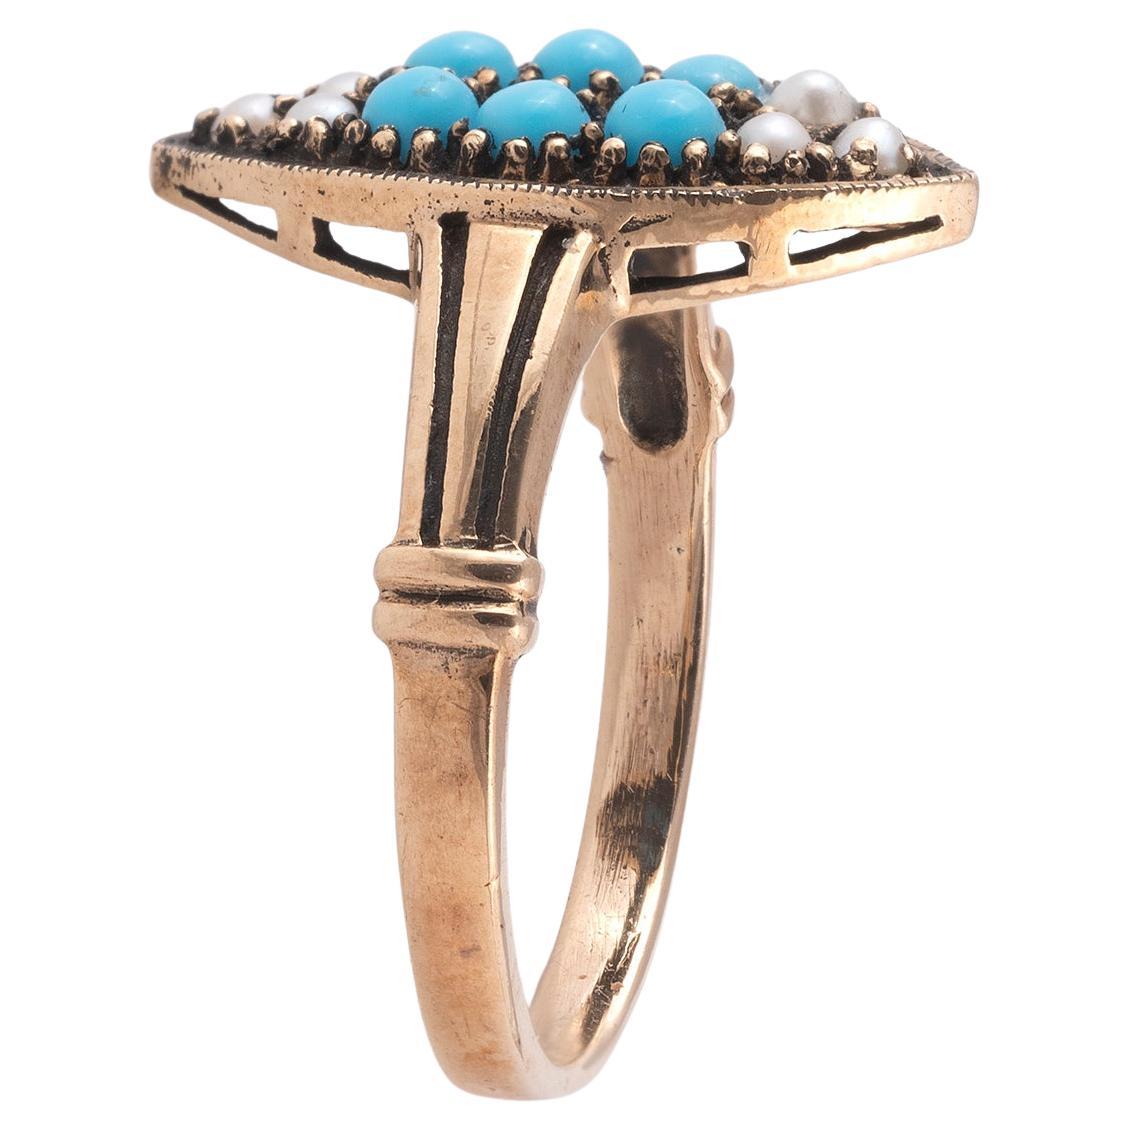 Marquise shaped ring pave set with pearl and turquoise.
Mounted in 14Kt yellow gold.
Finger size: 6 1/2
Weight: 3.7 gr
